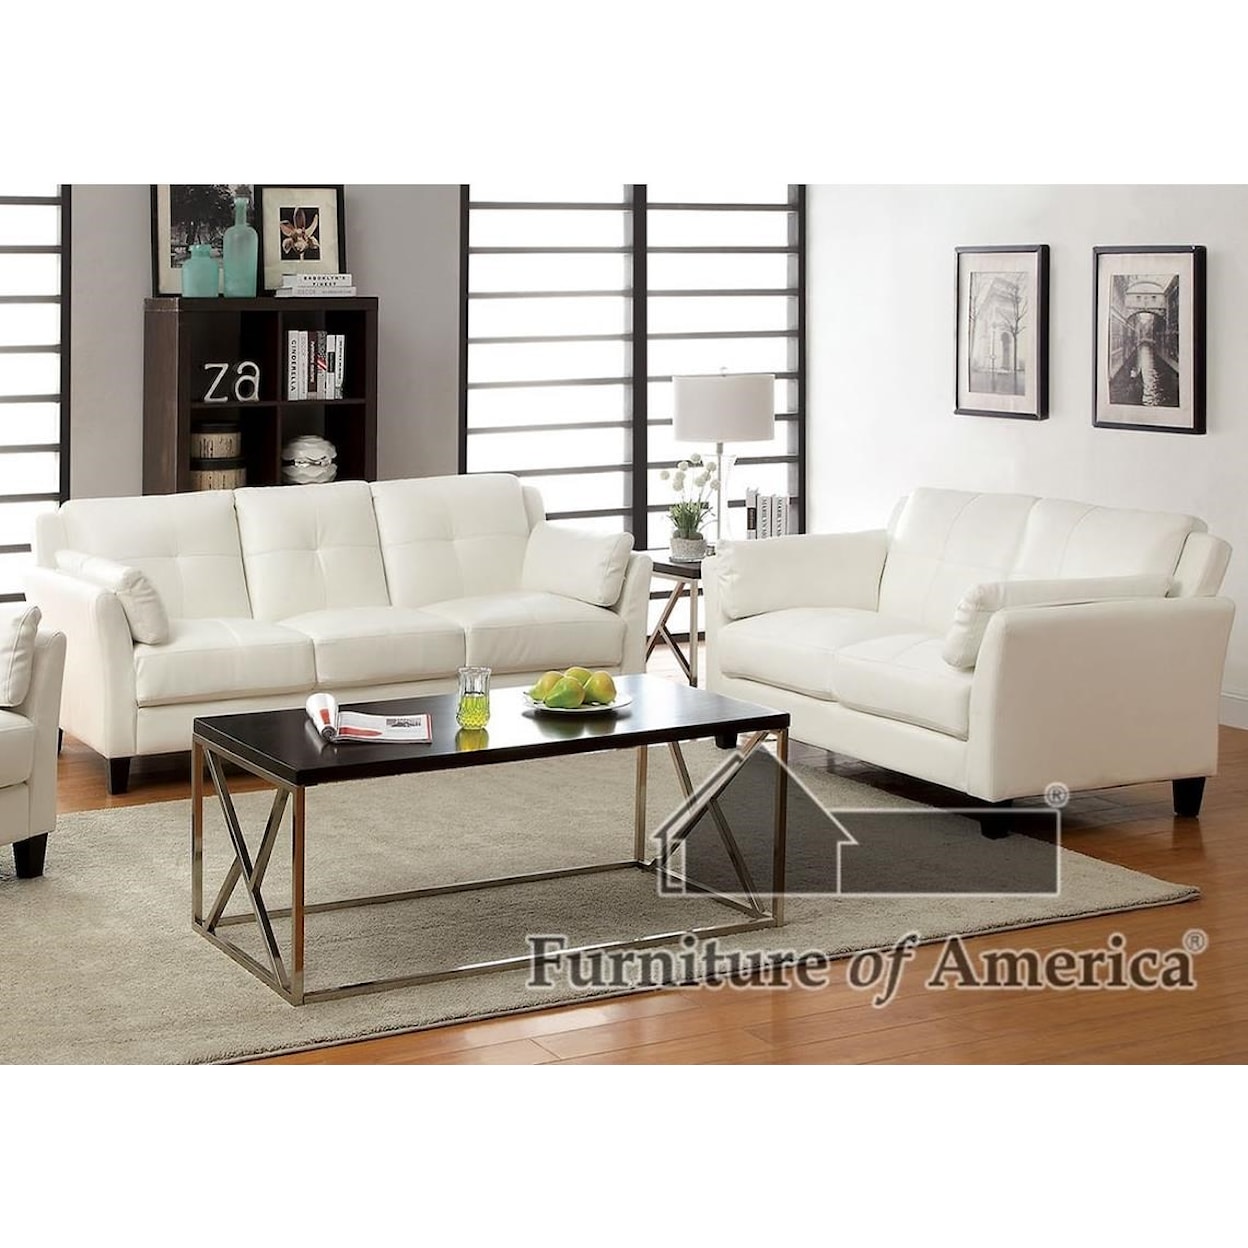 Furniture of America Pierre Stationary Living Room Group